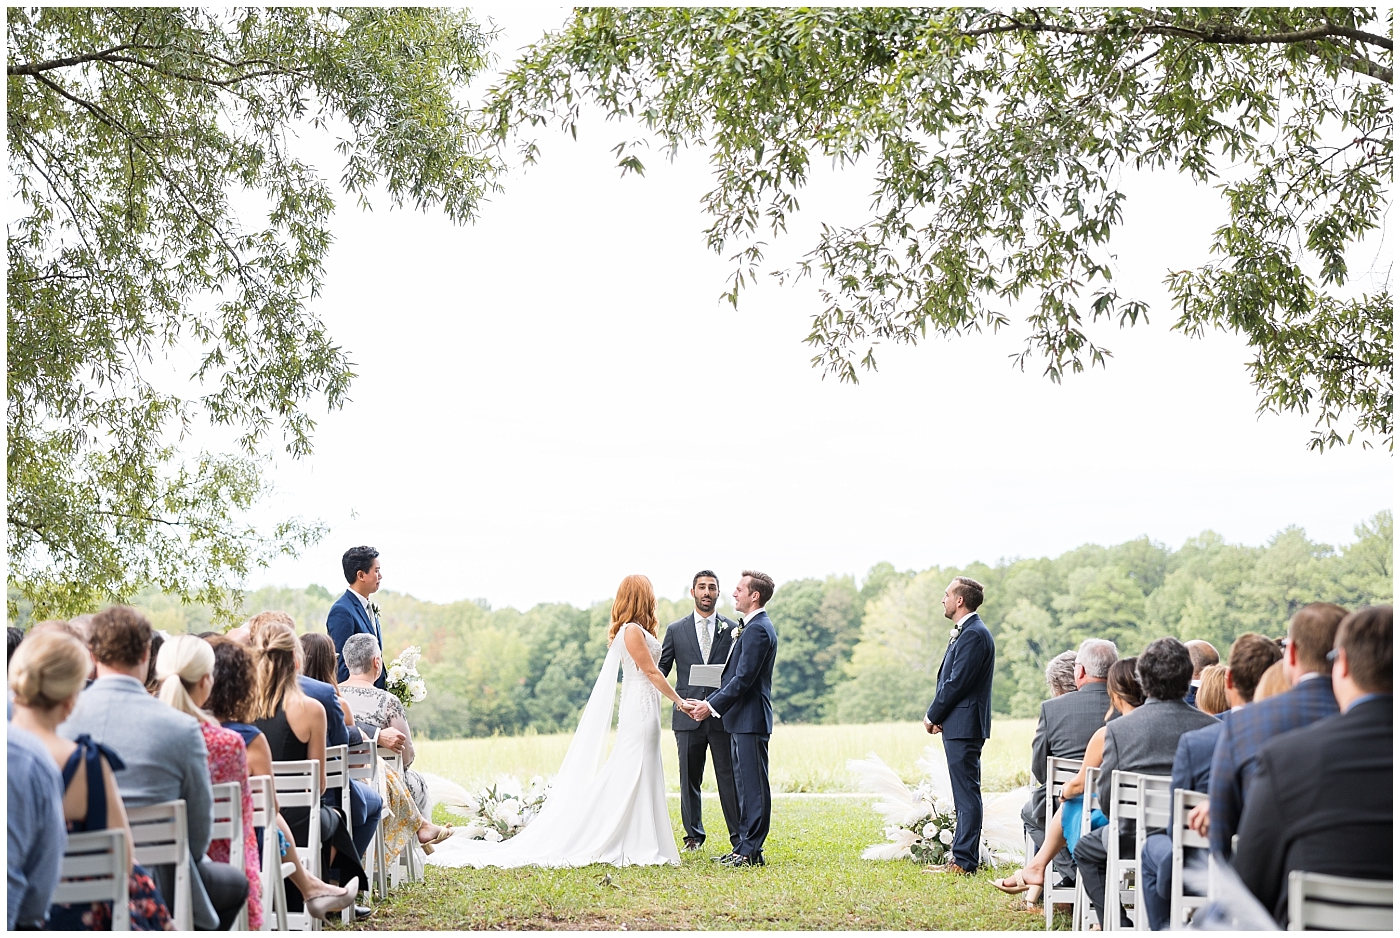 Fall Wedding at The Meadows in Raleigh under the Oak Trees after a rainstorm | Raleigh NC Wedding Photographer